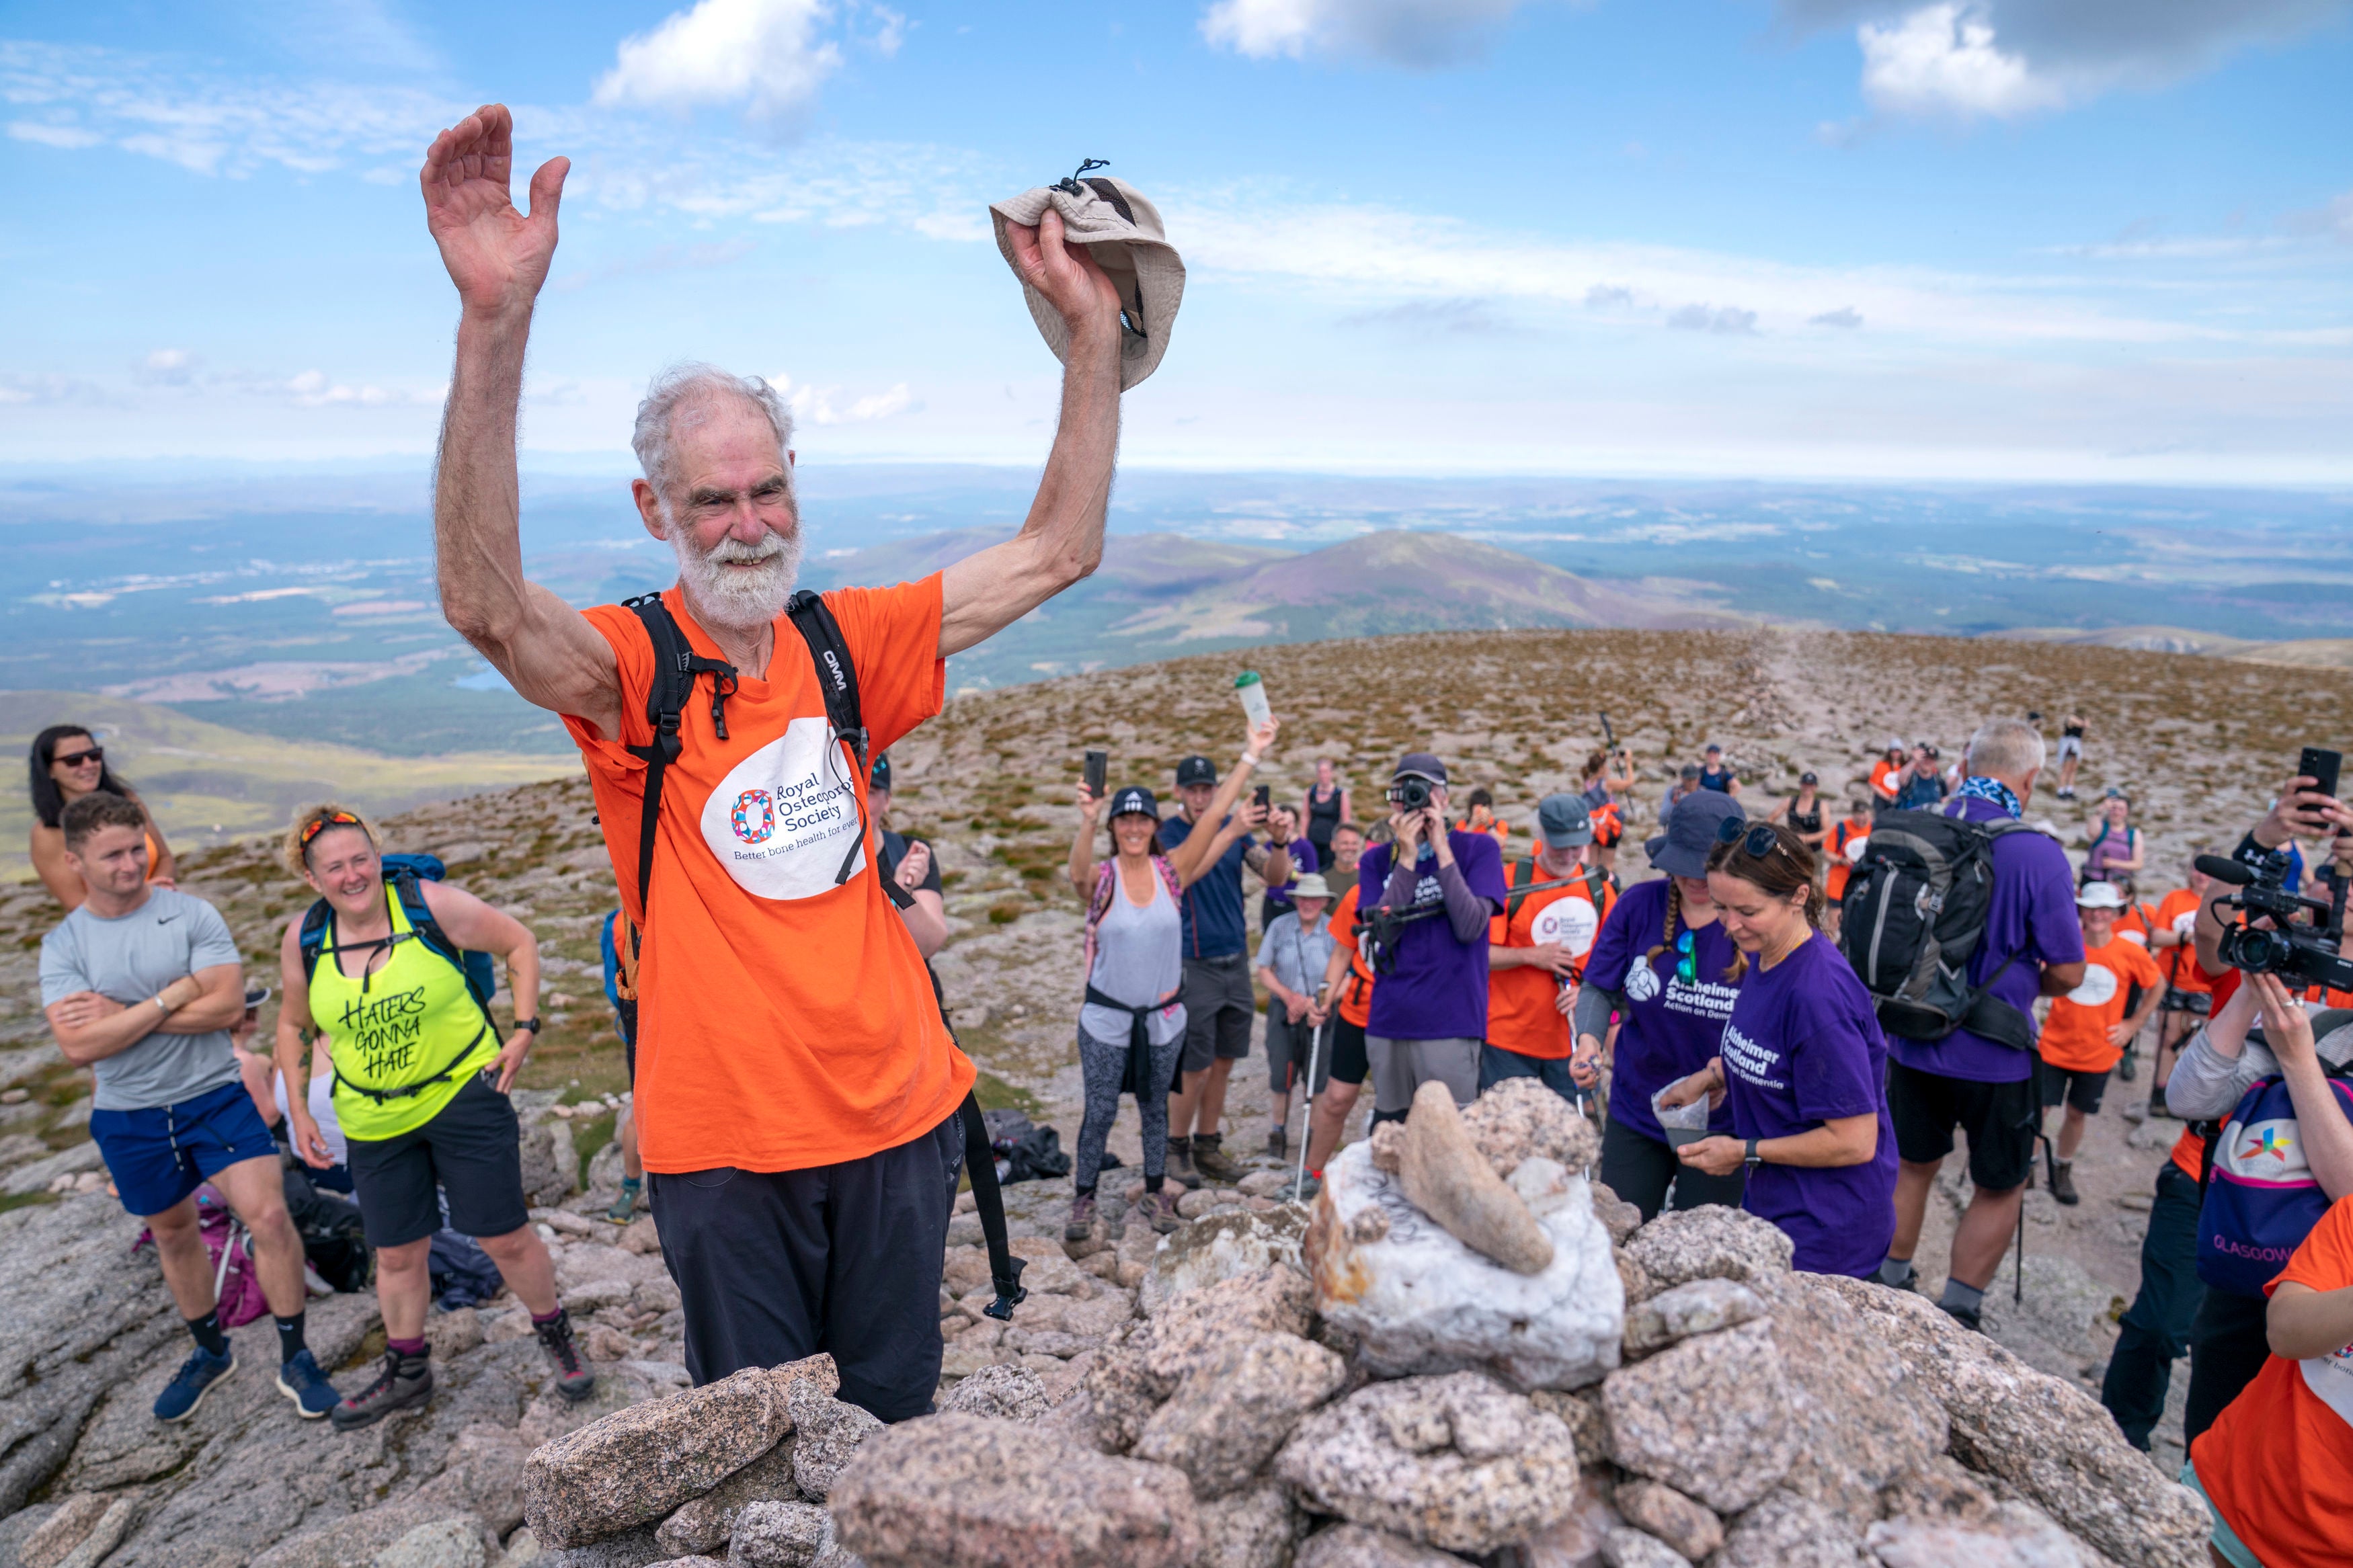 Nick Gardner, aged 82, reaches the very top of his final mountain the Cairn Gorm after setting the goal of climbing all 282 Munros in 1200 days following his wife Janet being taken into care with Alzheimer’s and osteoporosis. Picture date: Saturday August 13, 2022. PA Photo. See PA story CHARITY Munro. Photo credit should read: Jane Barlow/PA Wire